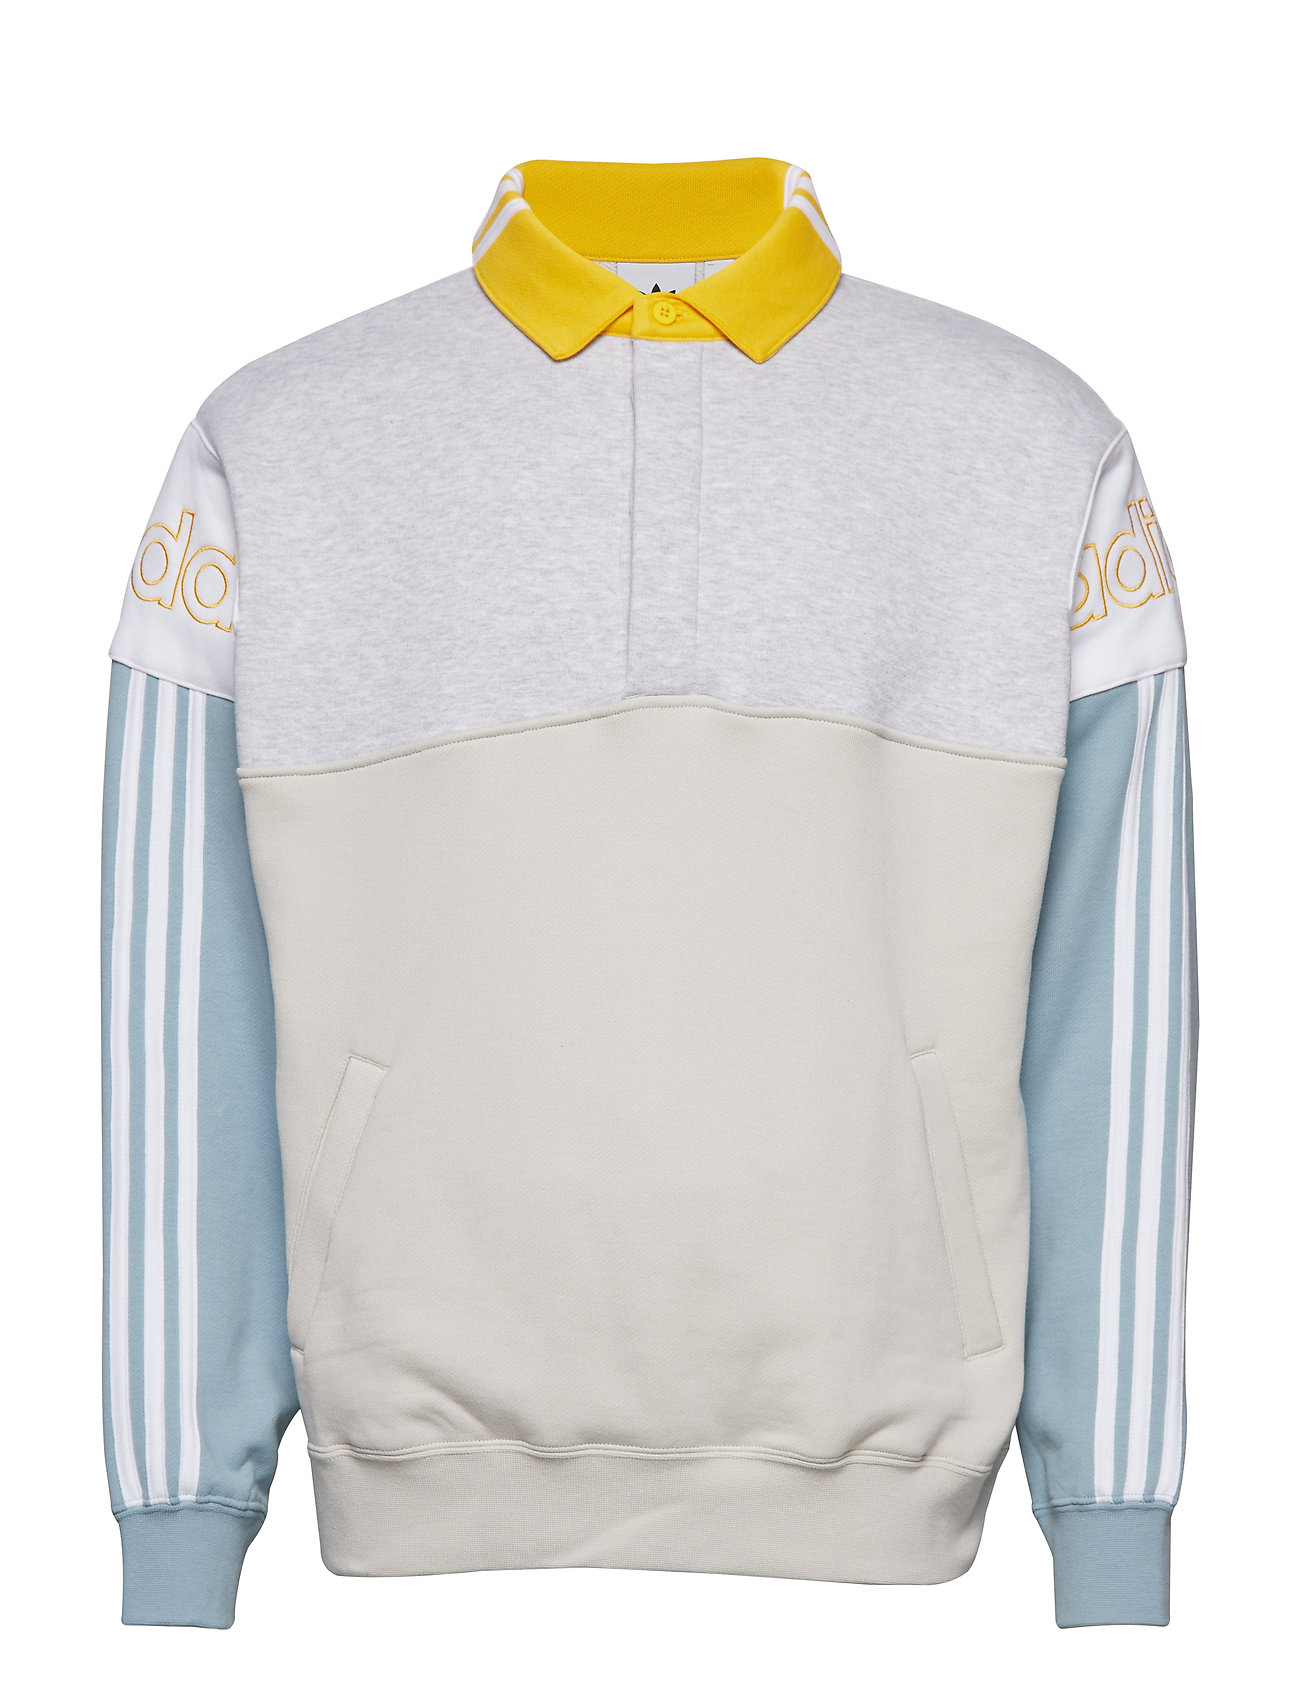 Deals Everyday adidas rugby sweat 